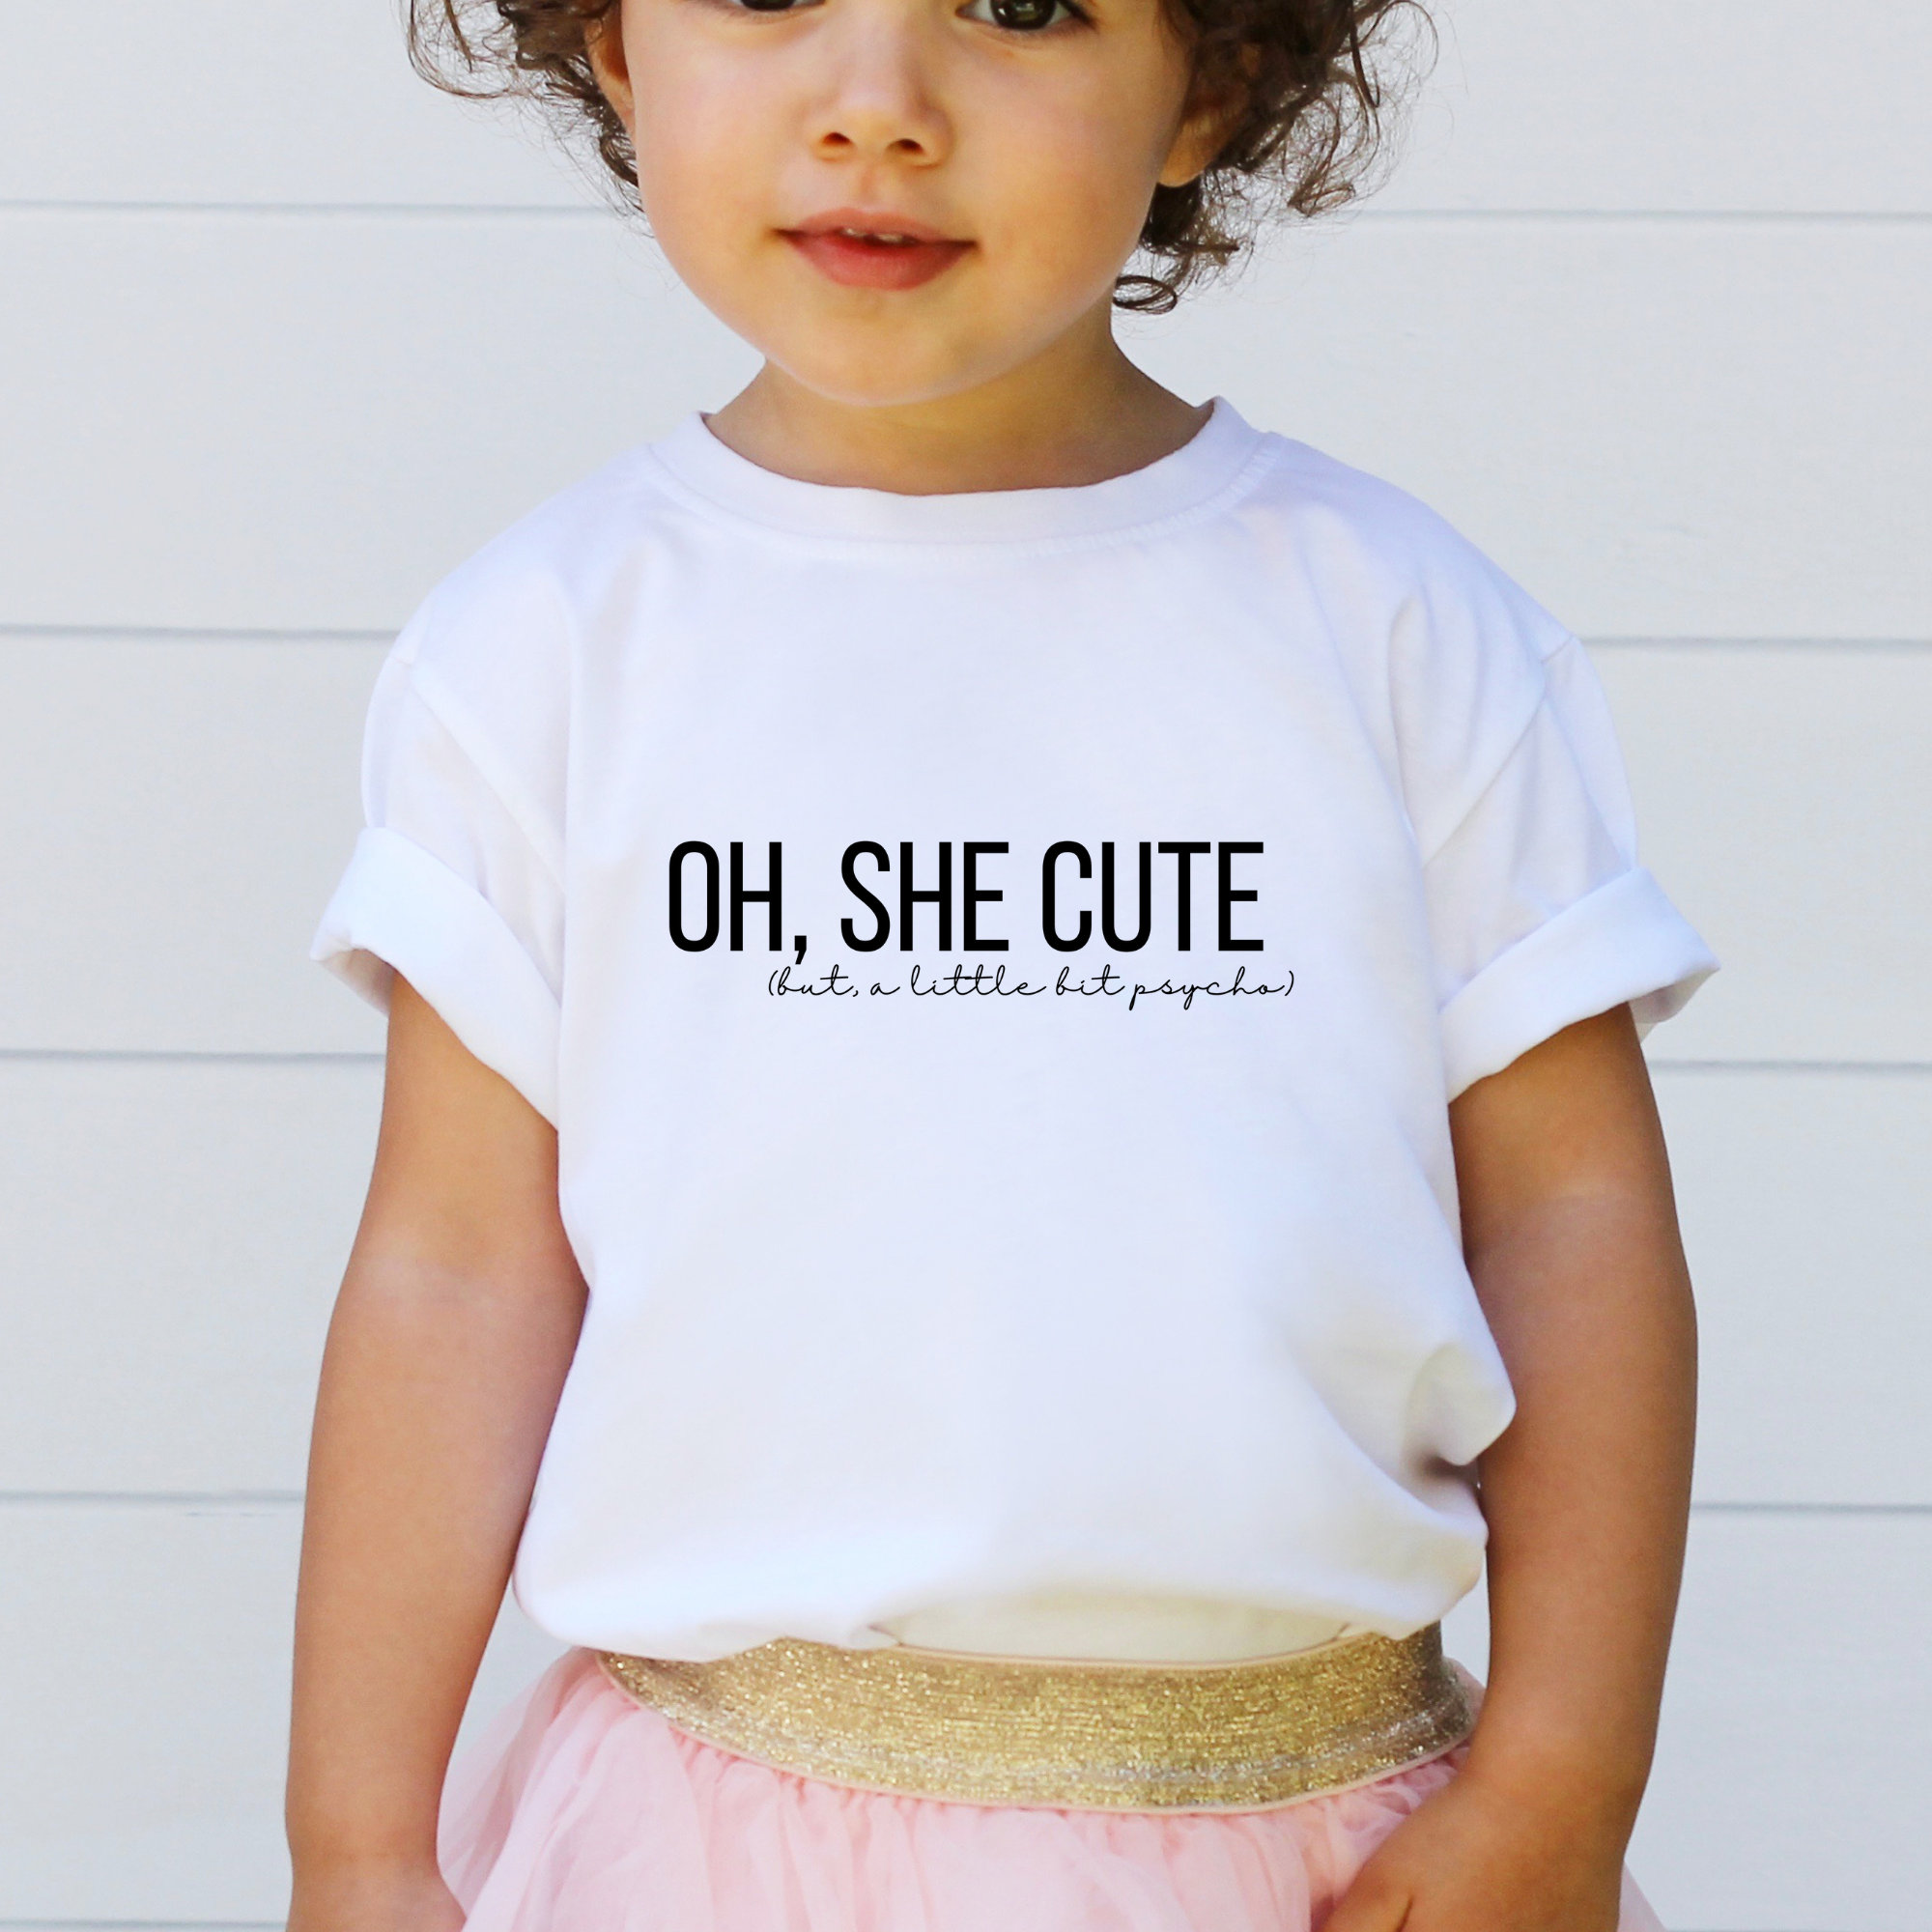 Funny T Shirt Designs For Girls